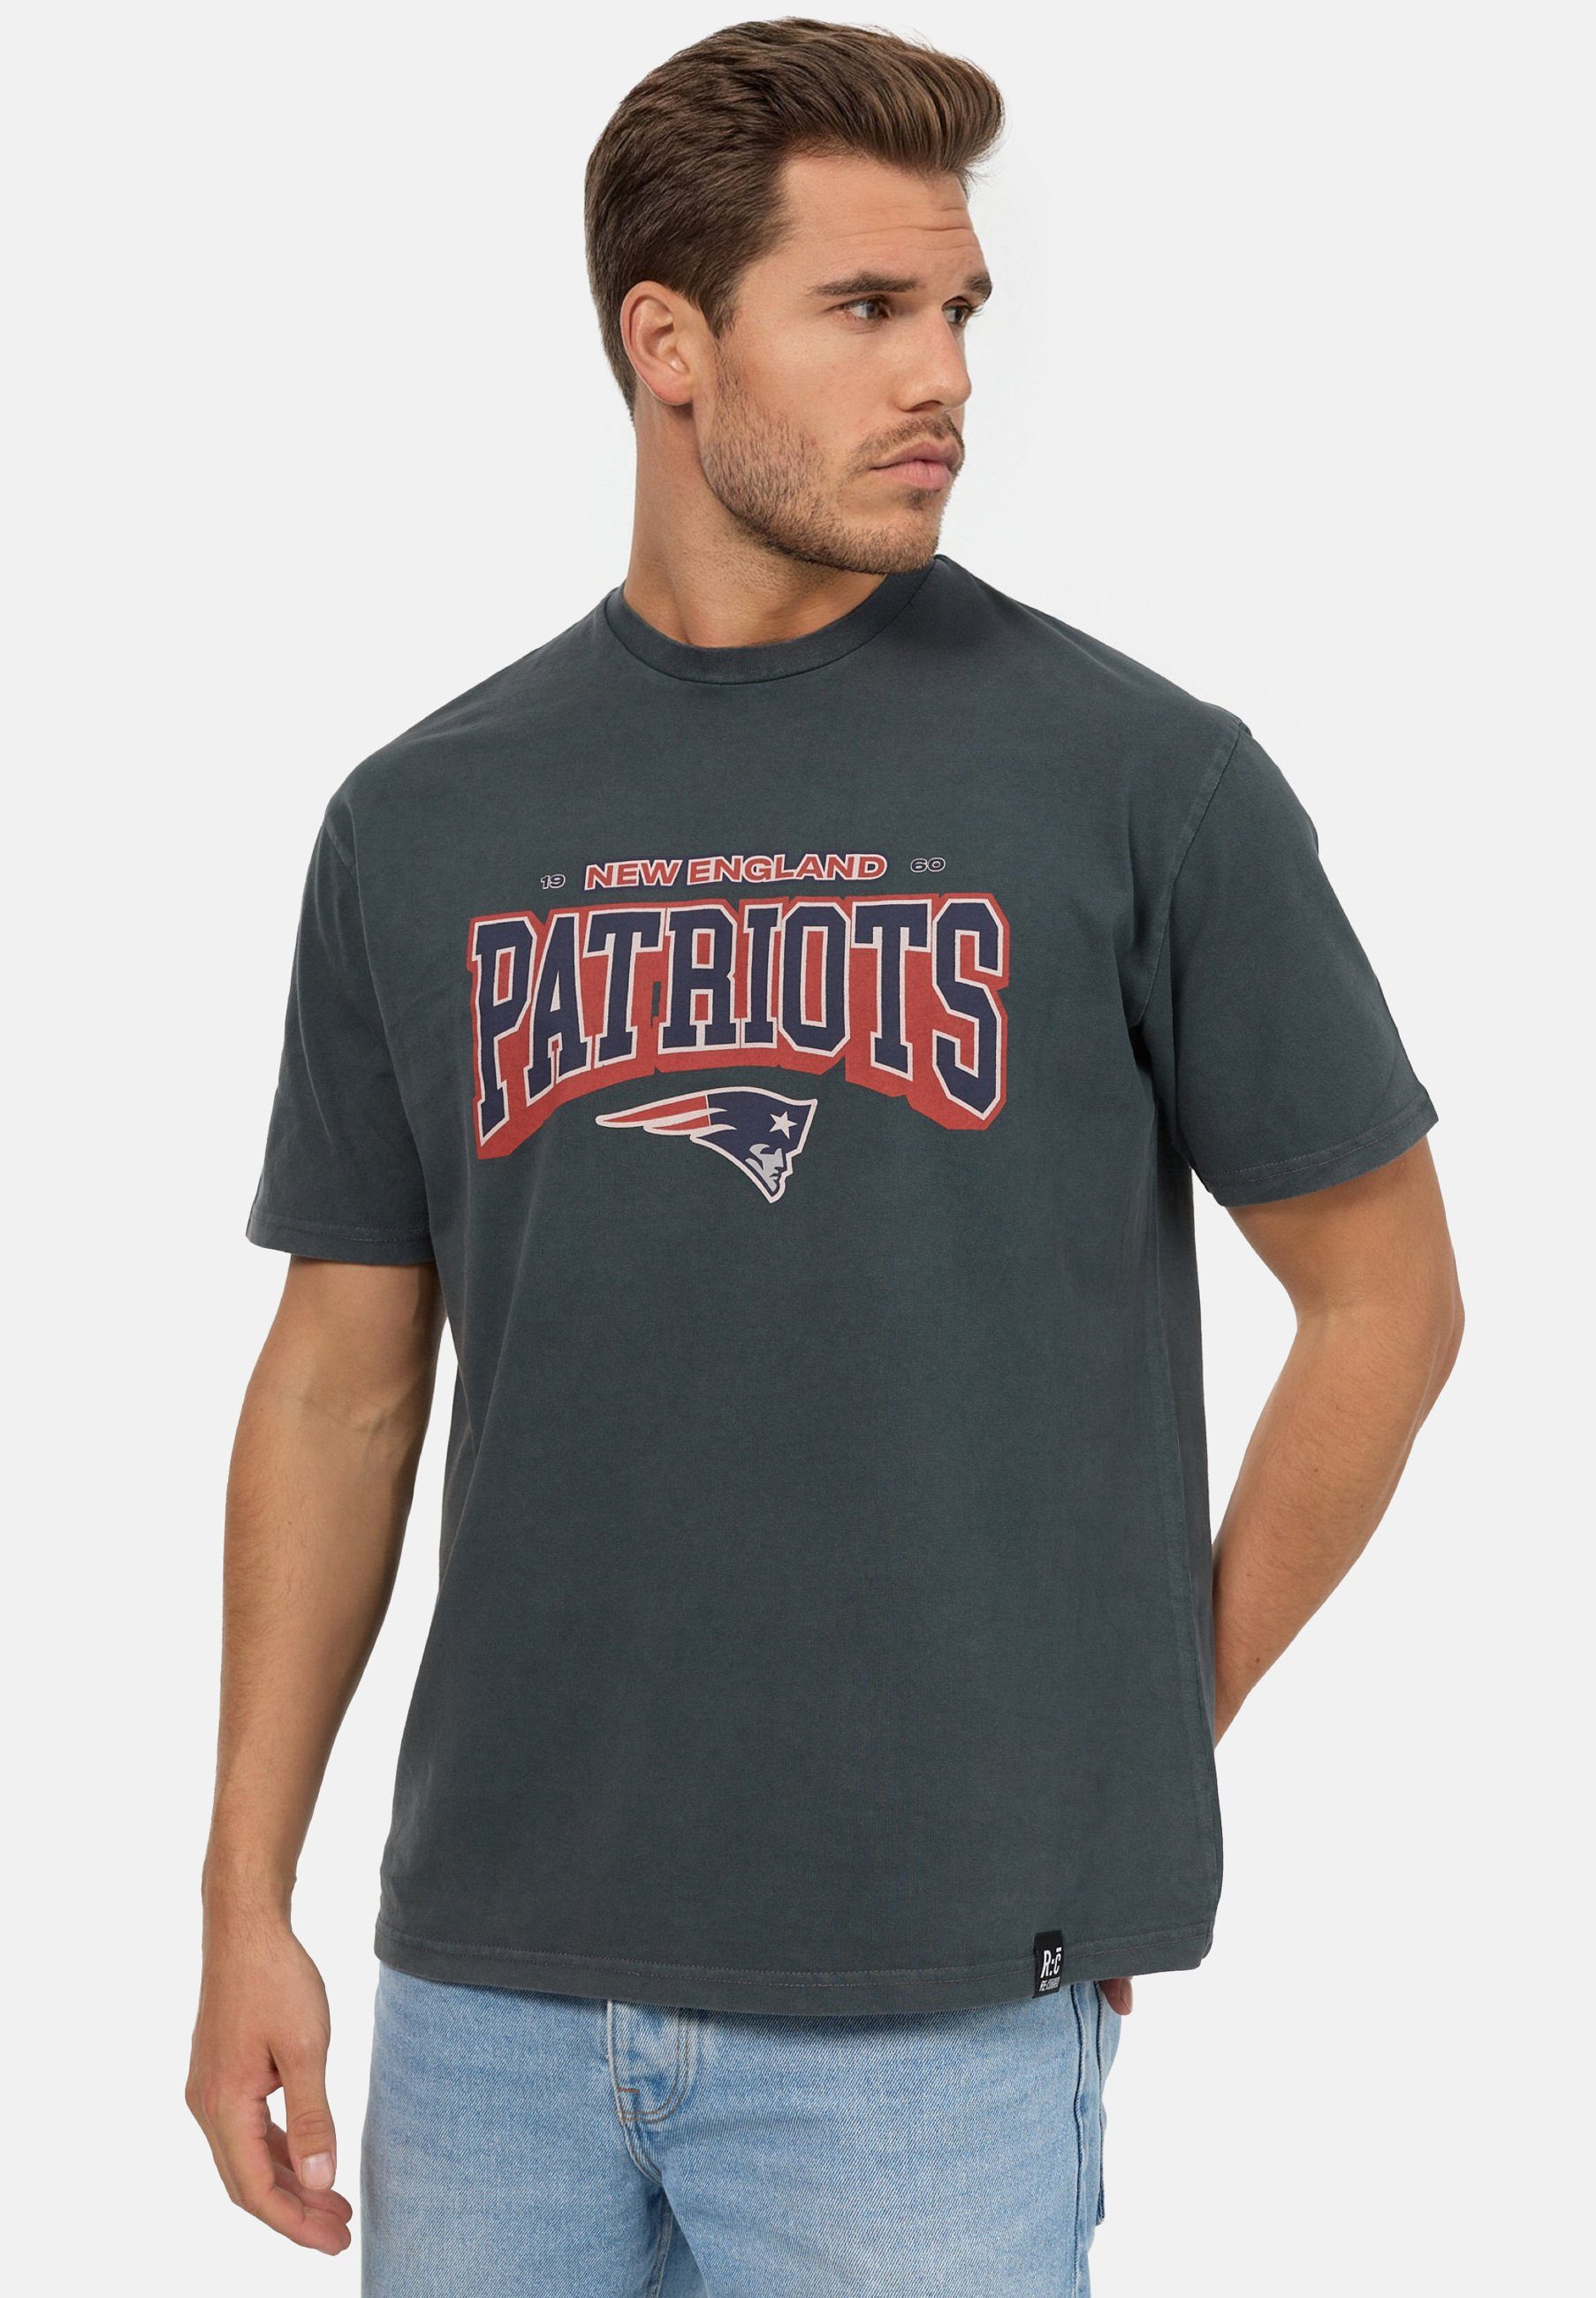 Recovered Relaxed Bio-Baumwolle Washed GOTS zertifizierte 17 NFL Patriots T-Shirt